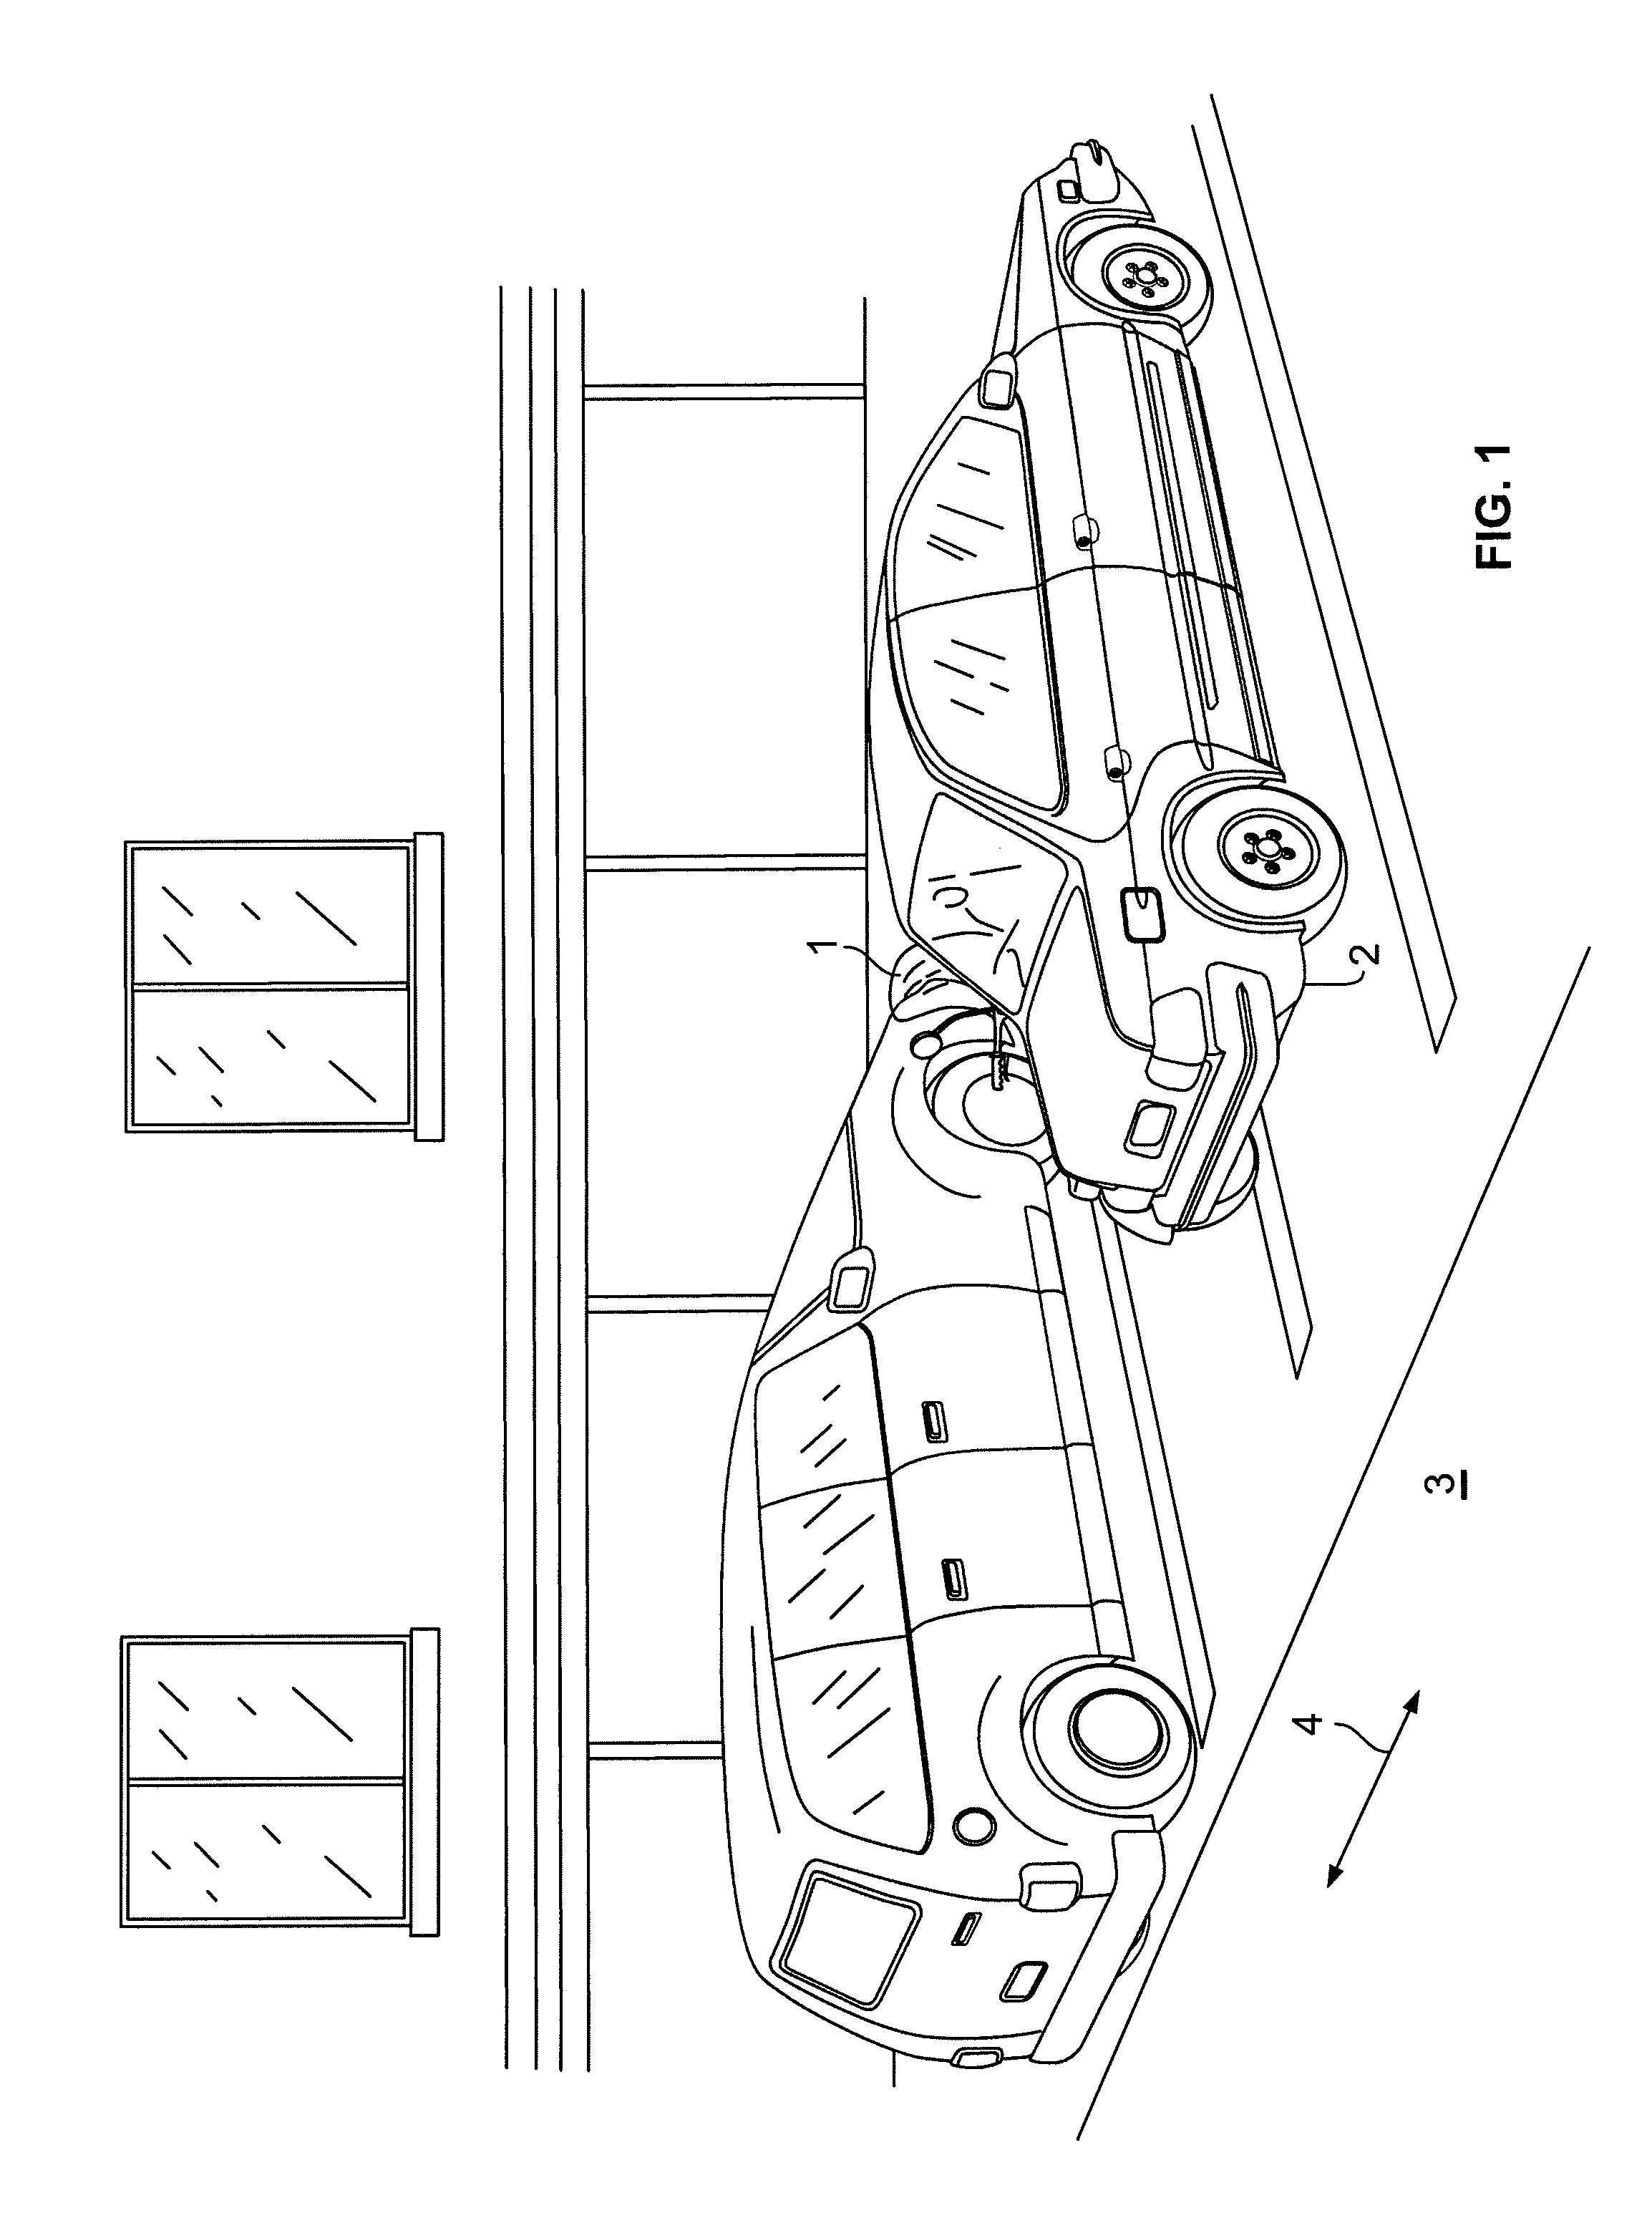 Retractable Parking and Safety Cone and Method of Use